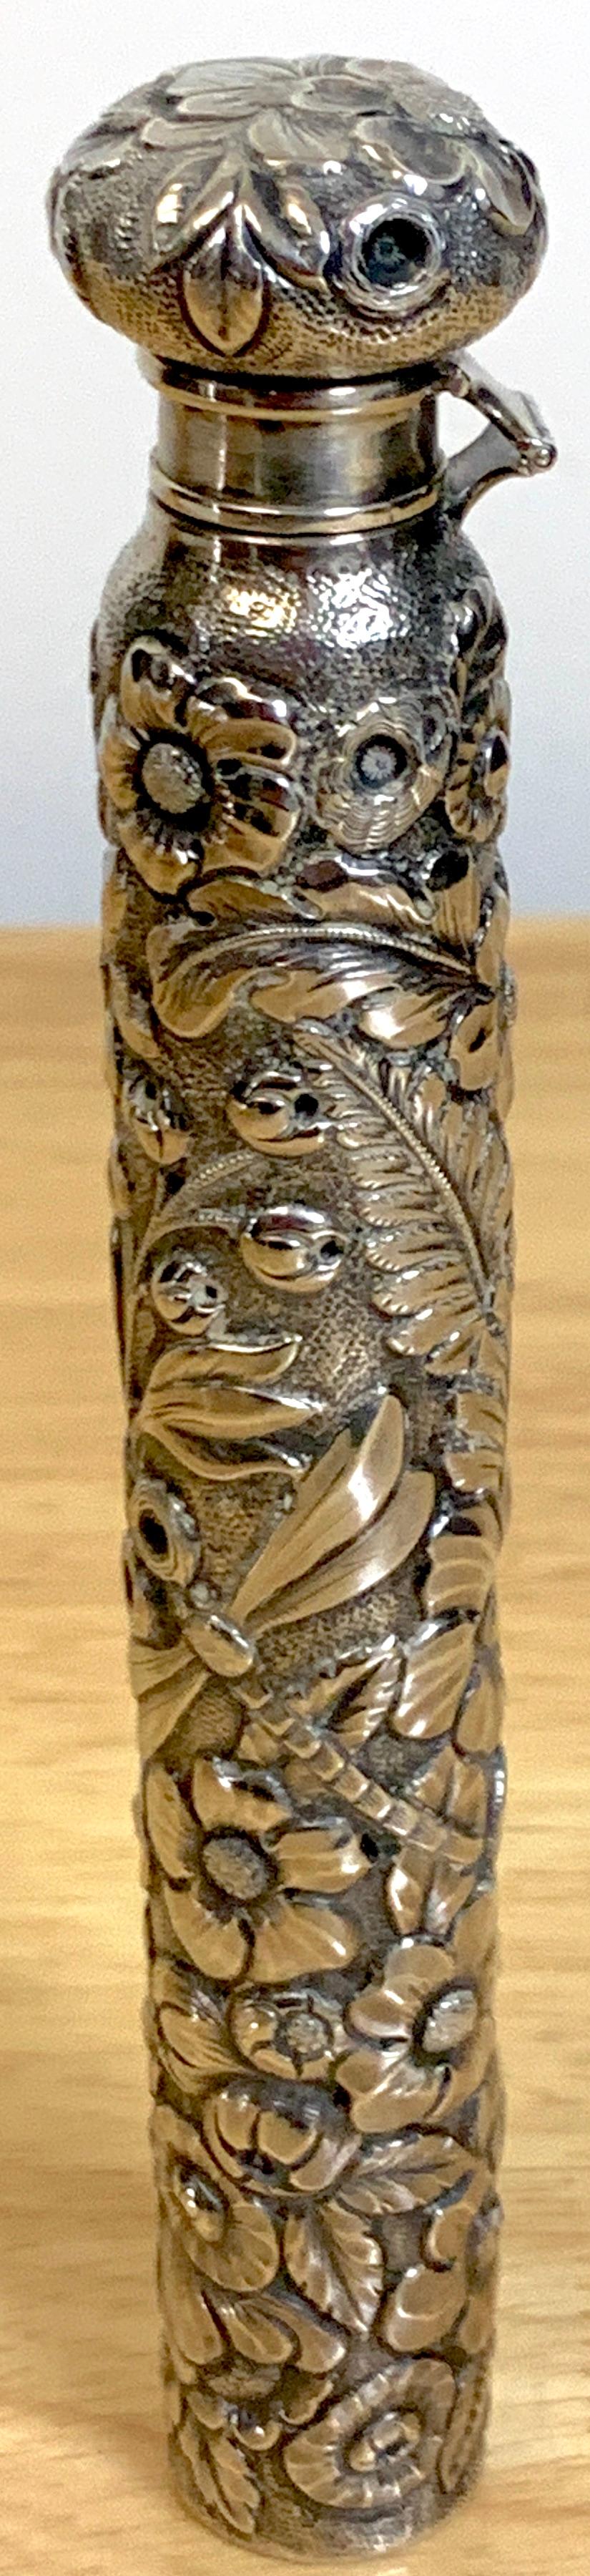 Large Dominick & Haff aesthetic sterling perfume or flask with dragon fly, a choice example, a tall profusely repoused with florals and leaves. Complete with locking hinged circular top, with cork interior. Stamped Dominick & Haff, Retailed by